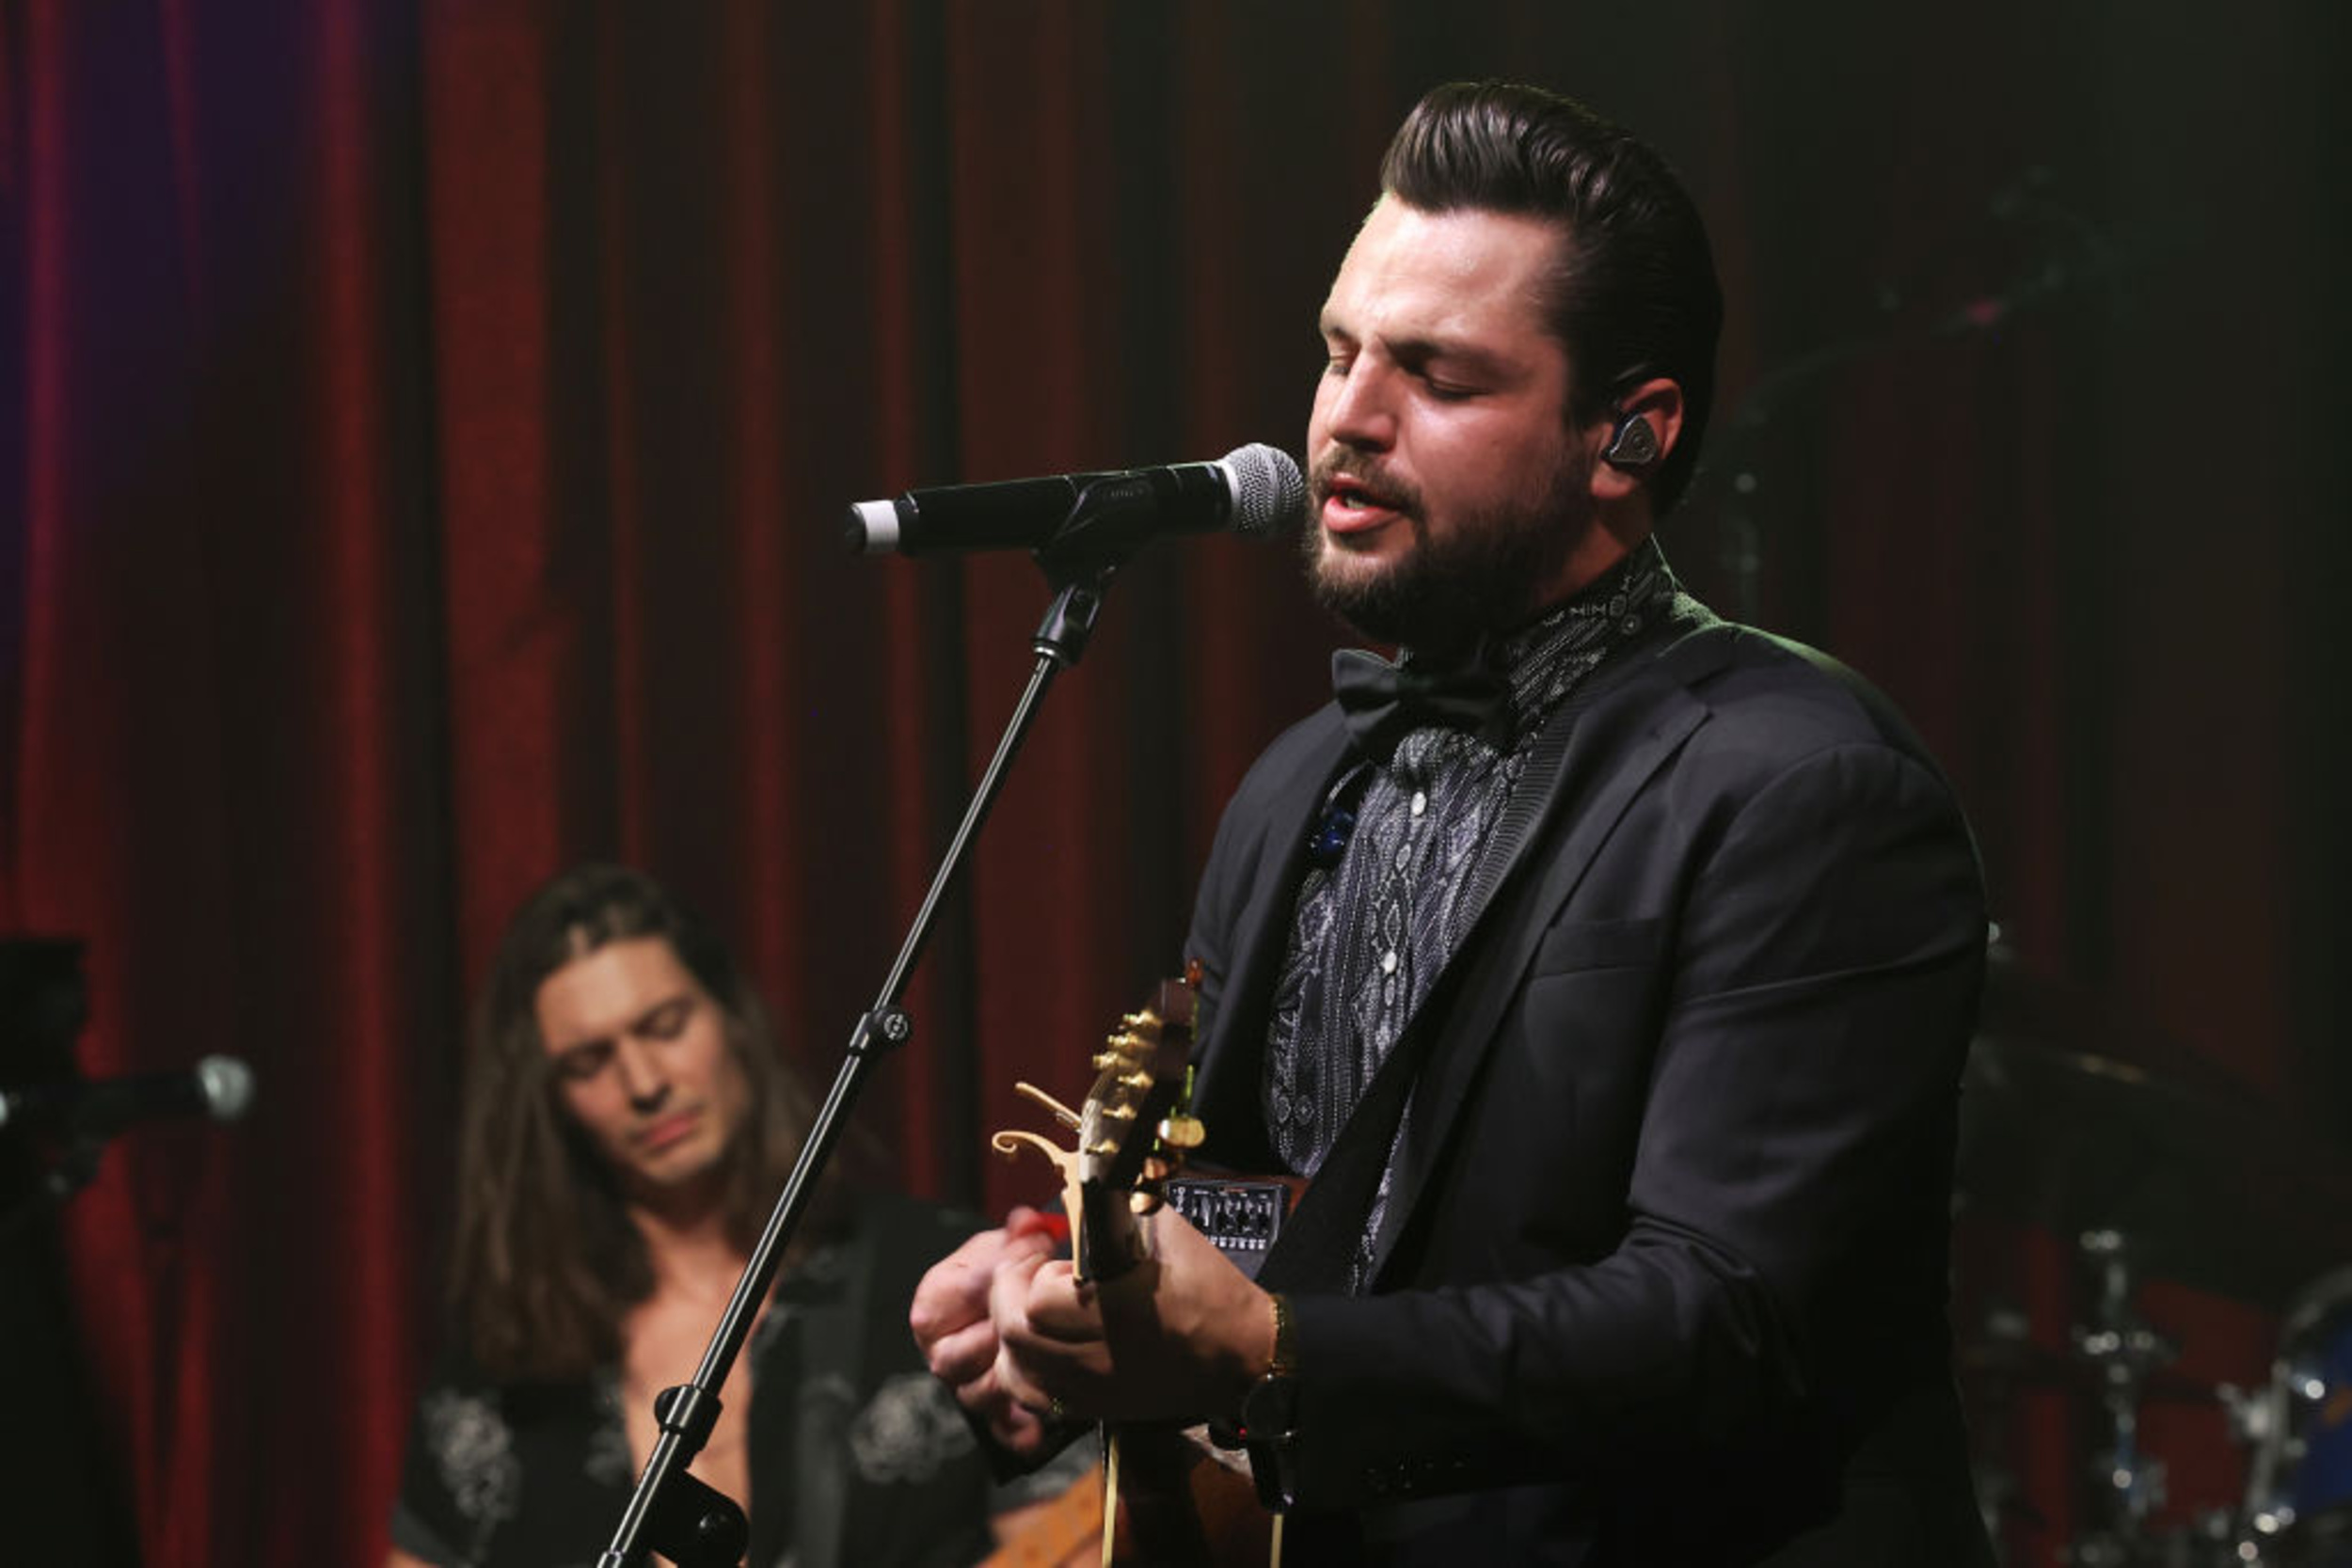 <p>The winner of the nineteenth season of "American Idol," Chayce Beckham has already scored a Platinum hit with 2021's "23," but he's not stopping there. In 2023, Beckham returned with a great new single, "Til The Day I Die," and he's headed out on tour with Luke Bryan in 2024. </p><p>You may also like: <a href='https://www.yardbarker.com/entertainment/articles/the_best_sitcom_bars_and_restaurants_022924/s1__38796474'>The best sitcom bars and restaurants</a></p>